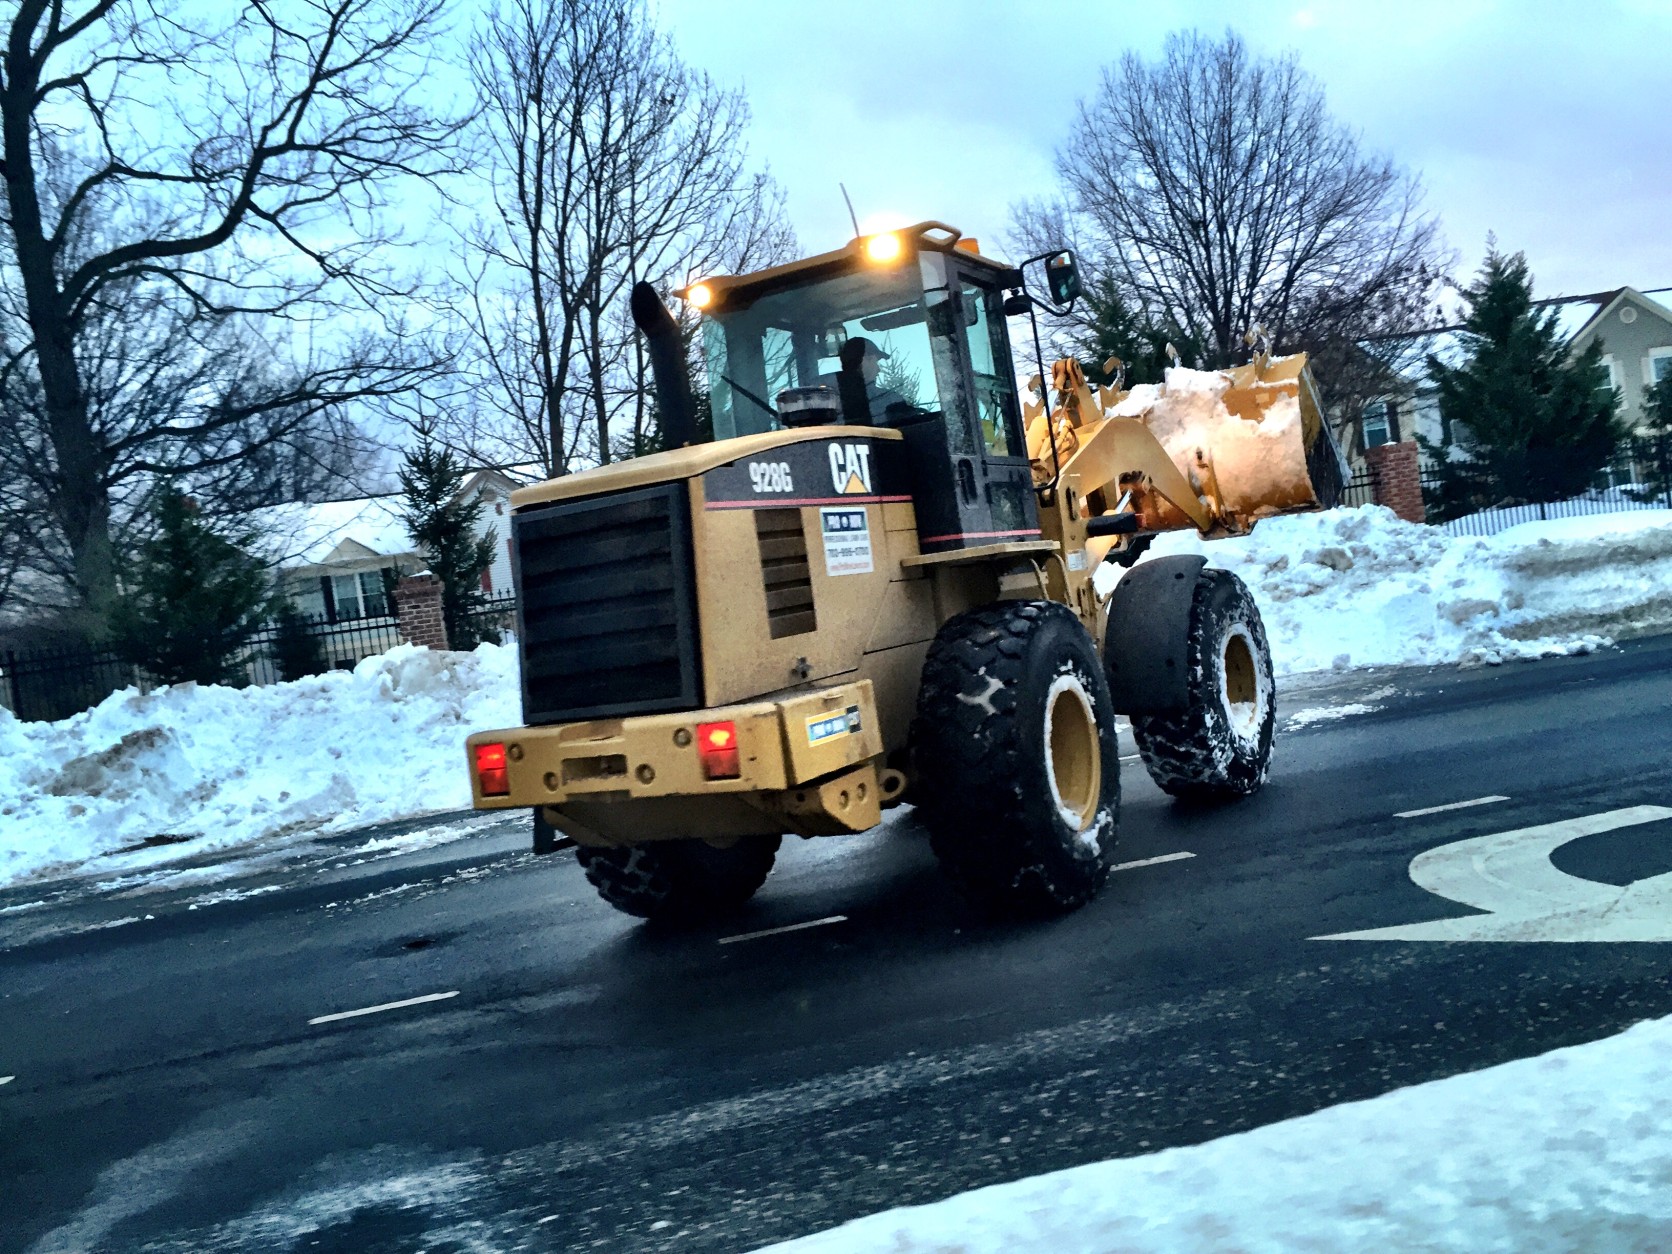 A front end loader removes a lane's worth of snow on West Ox Road. (WTOP/Neal Augenstein)